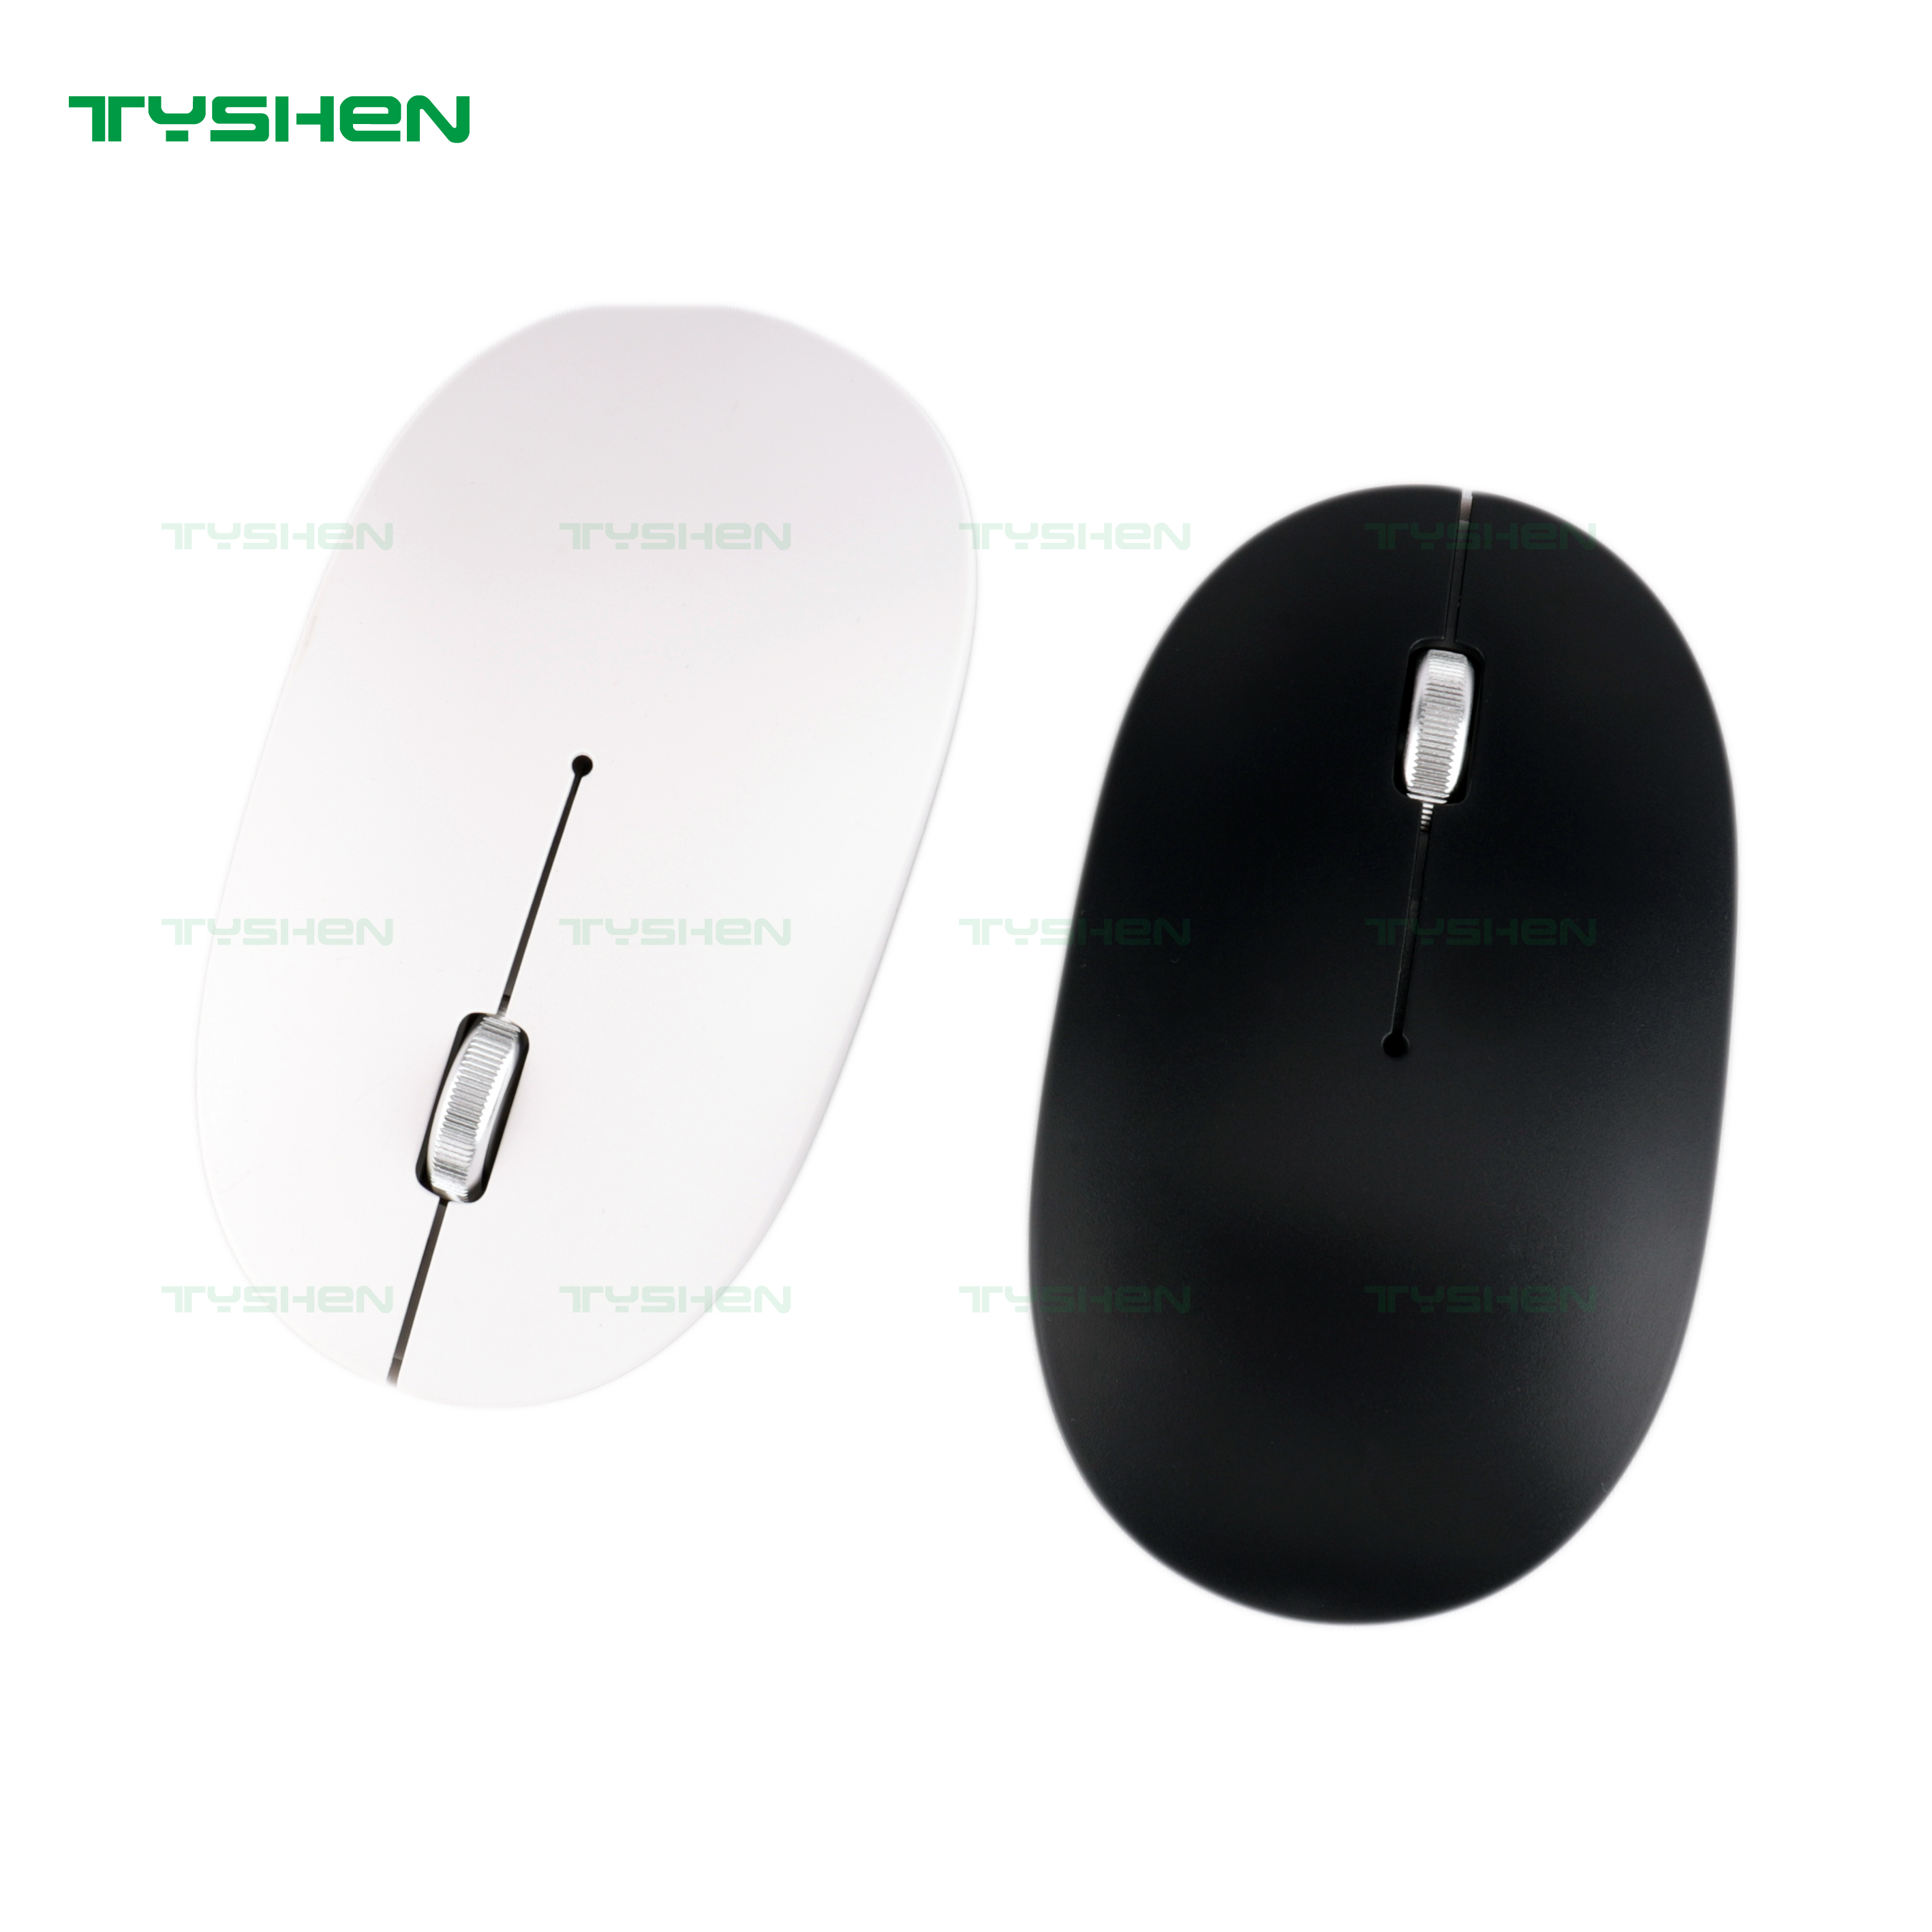 Silet Wireless Mouse of Quality Model,Mute Wireless Mouse,4 Buttons,Metal Feel Scroll